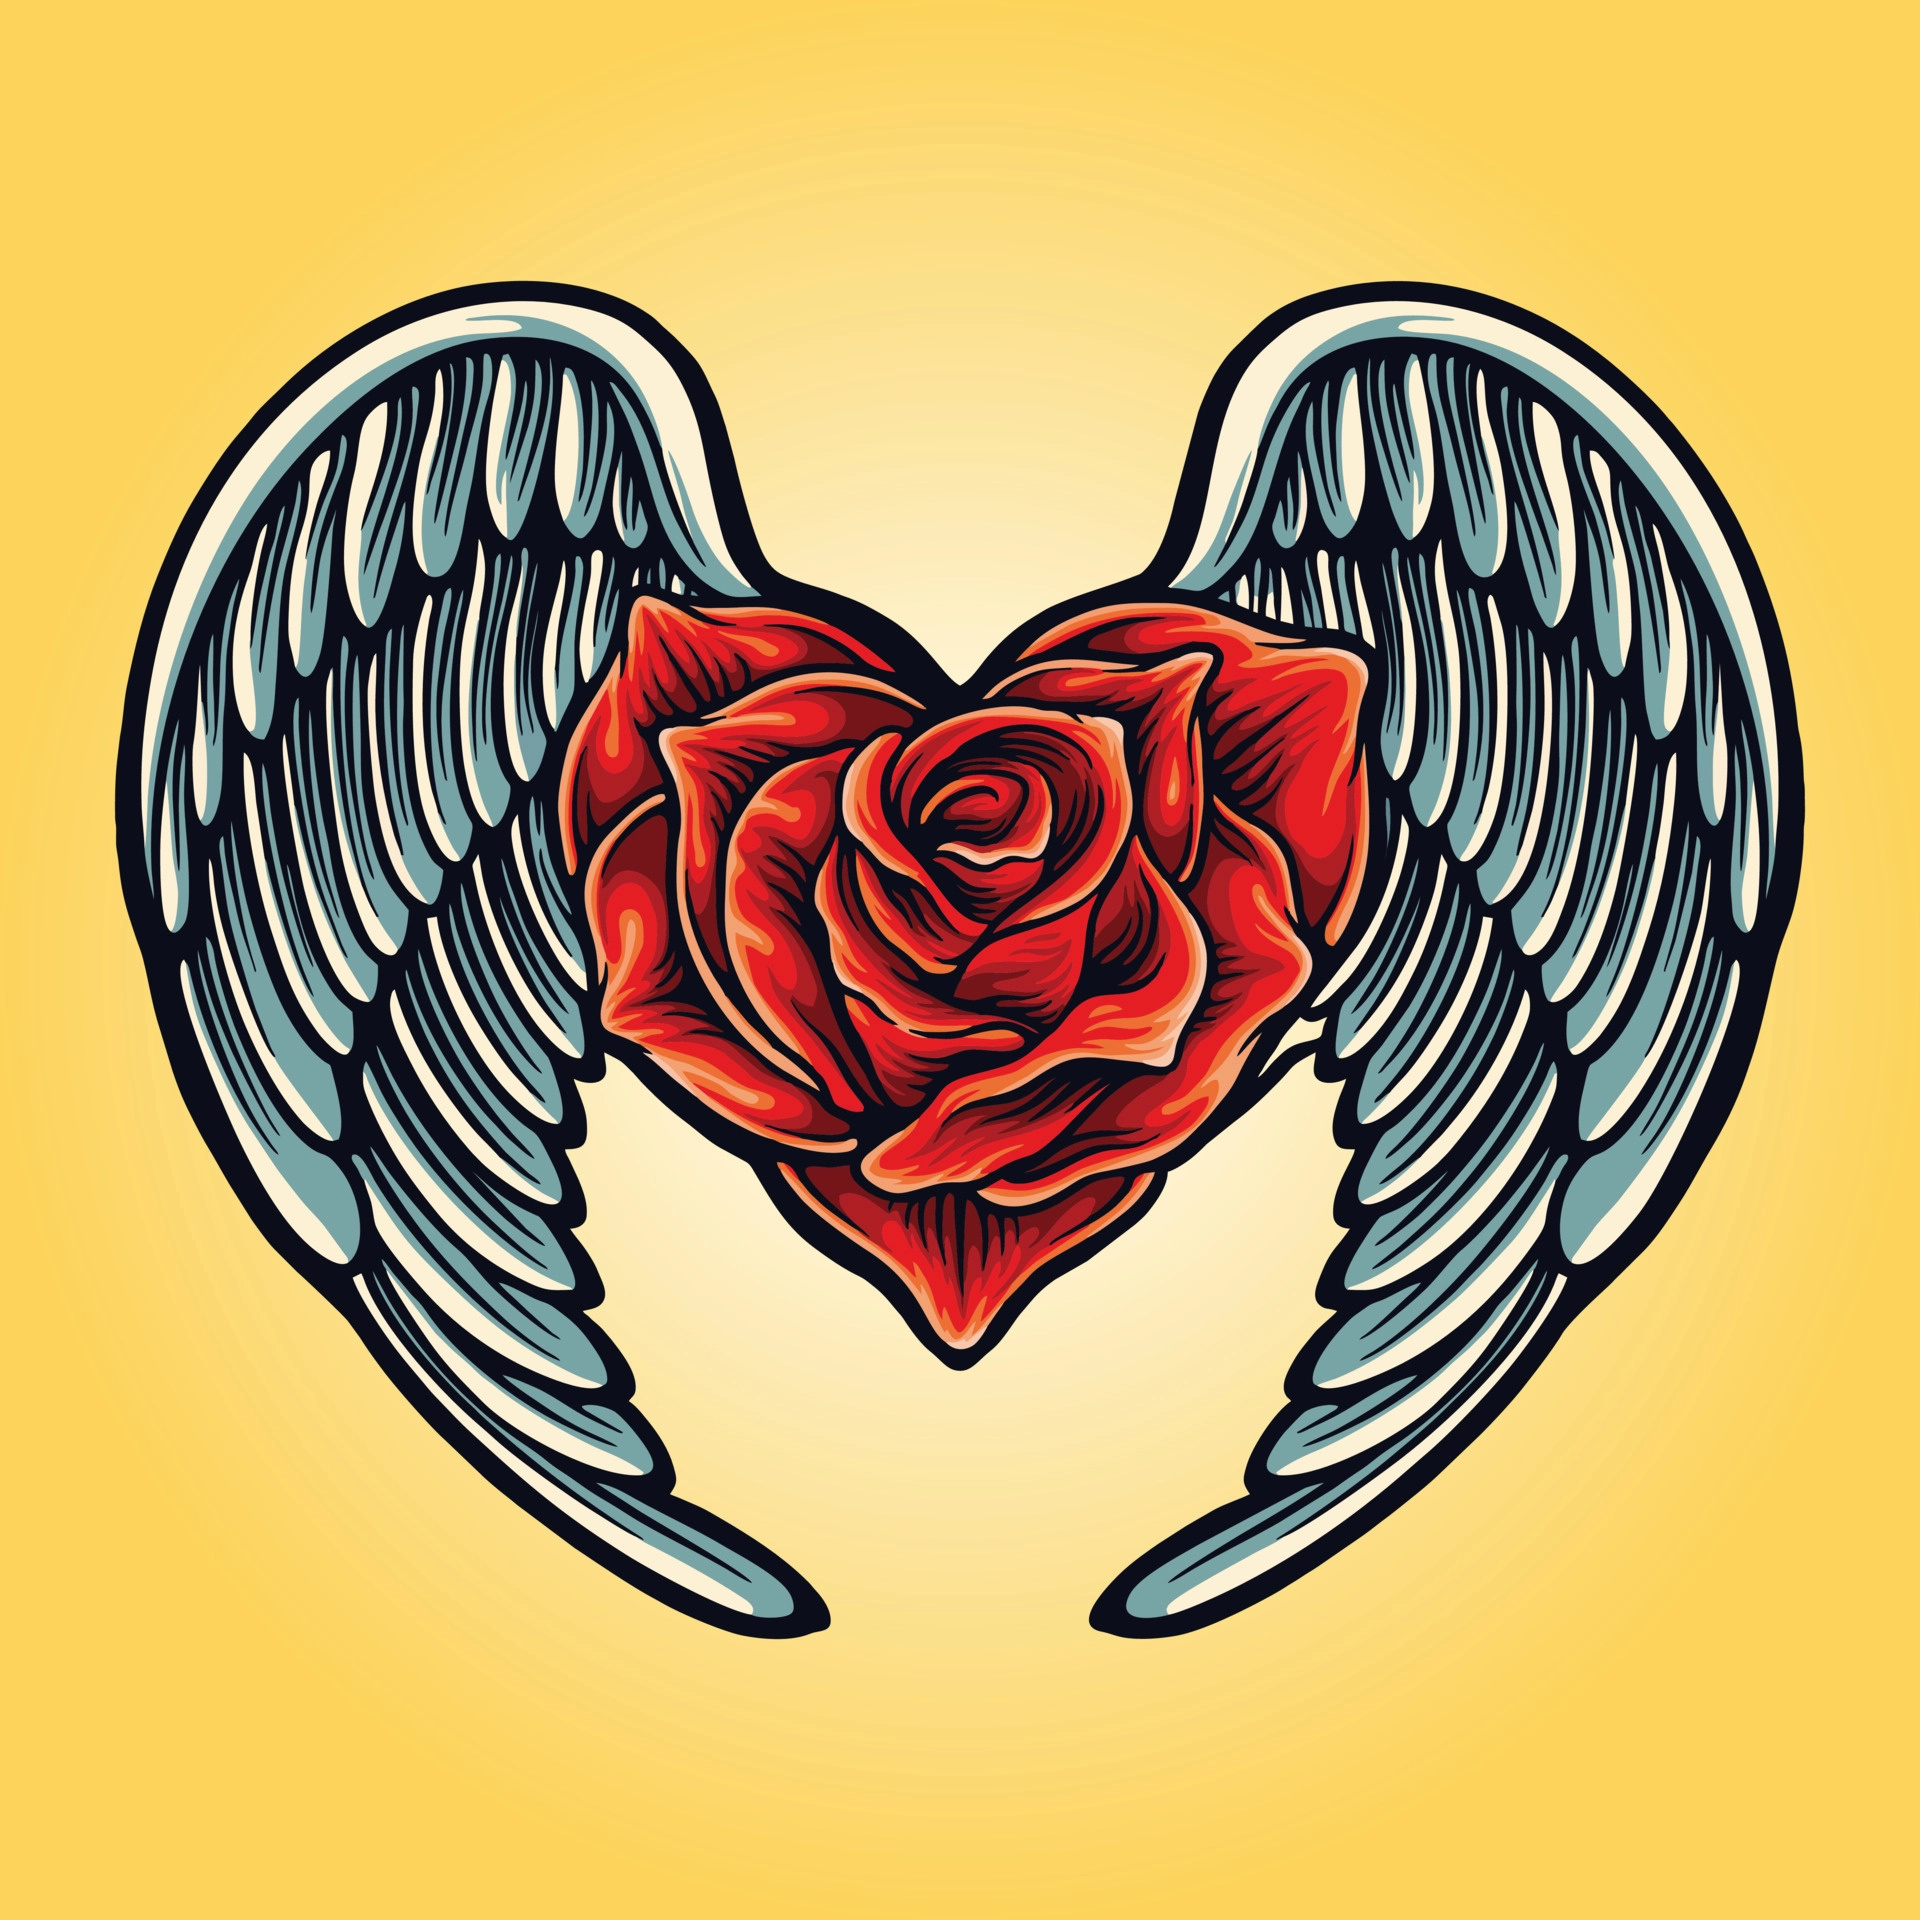 Heart With Wings, Tattoo illustration, Rose heart symbol, Angelic artwork, 1920x1920 HD Handy